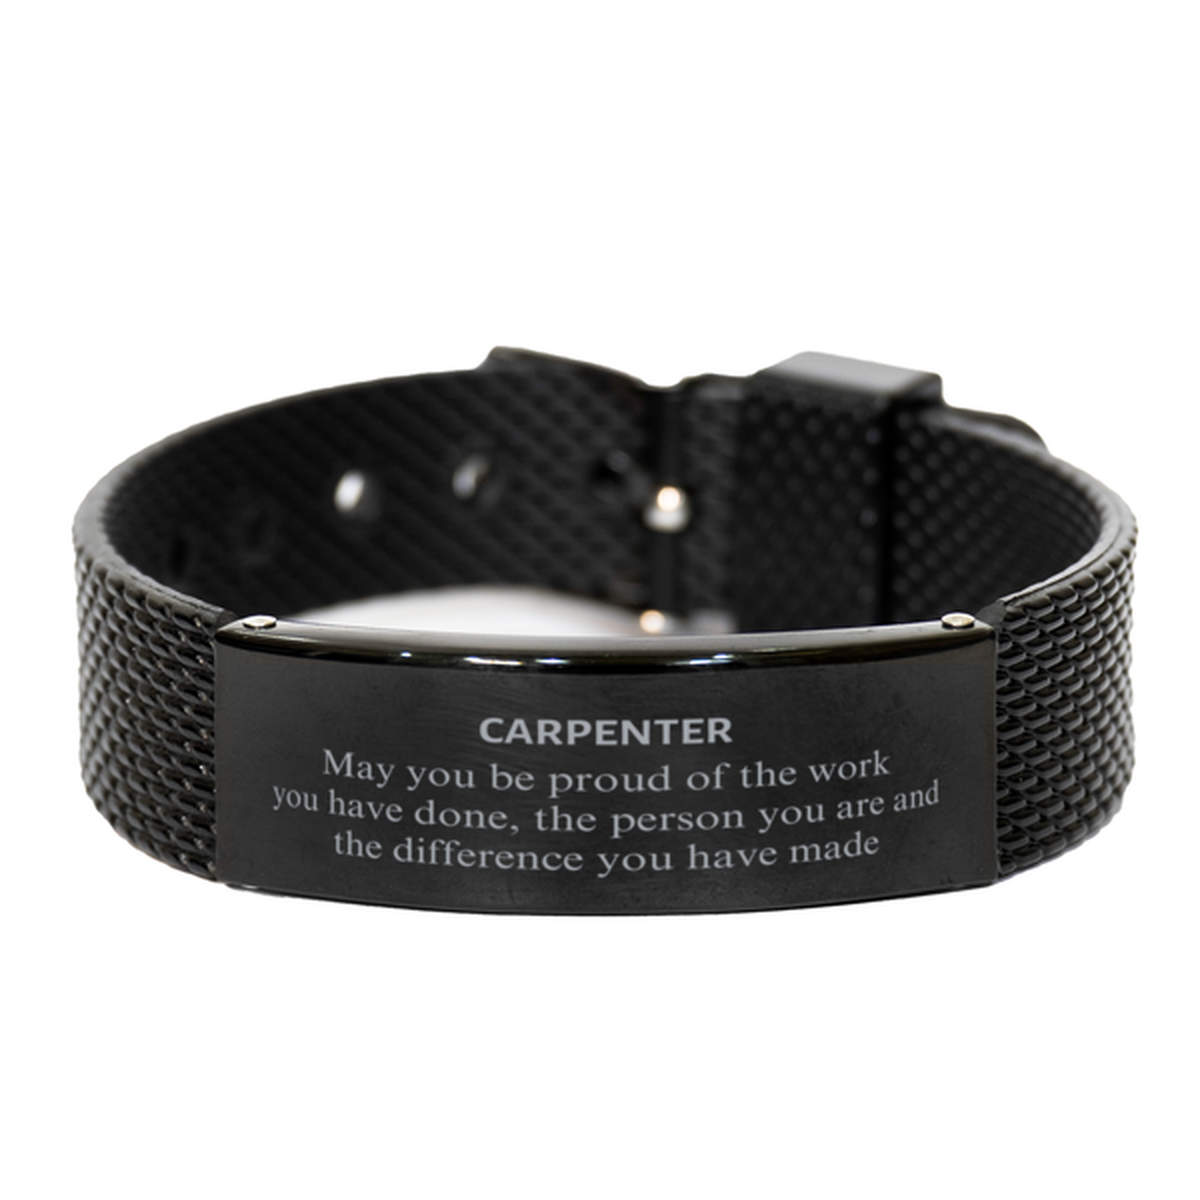 Carpenter May you be proud of the work you have done, Retirement Carpenter Black Shark Mesh Bracelet for Colleague Appreciation Gifts Amazing for Carpenter